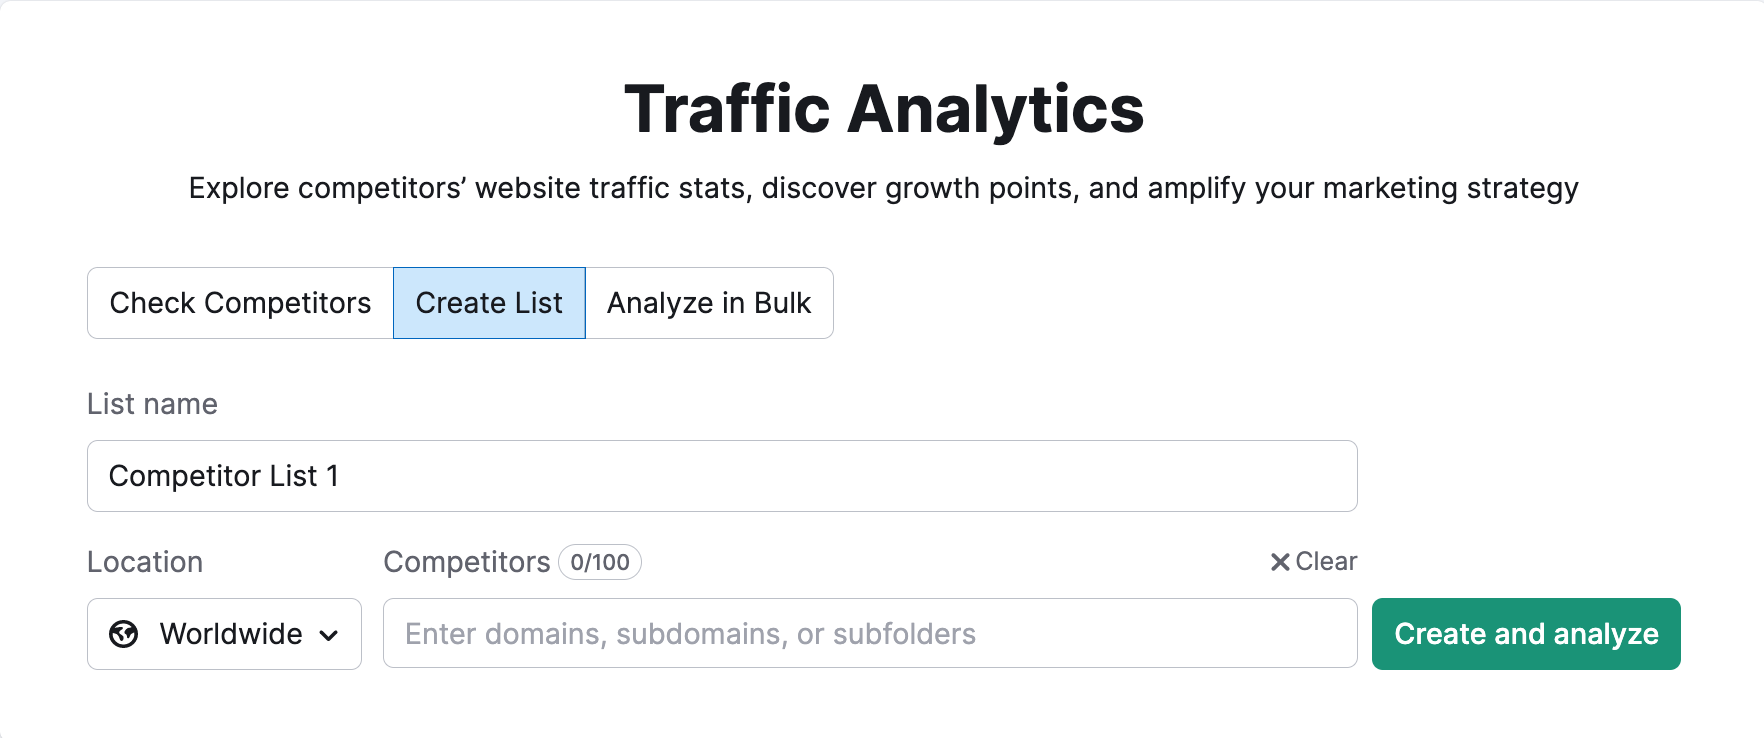 An example of the Traffic Analytics landing page with a Create List option selected.